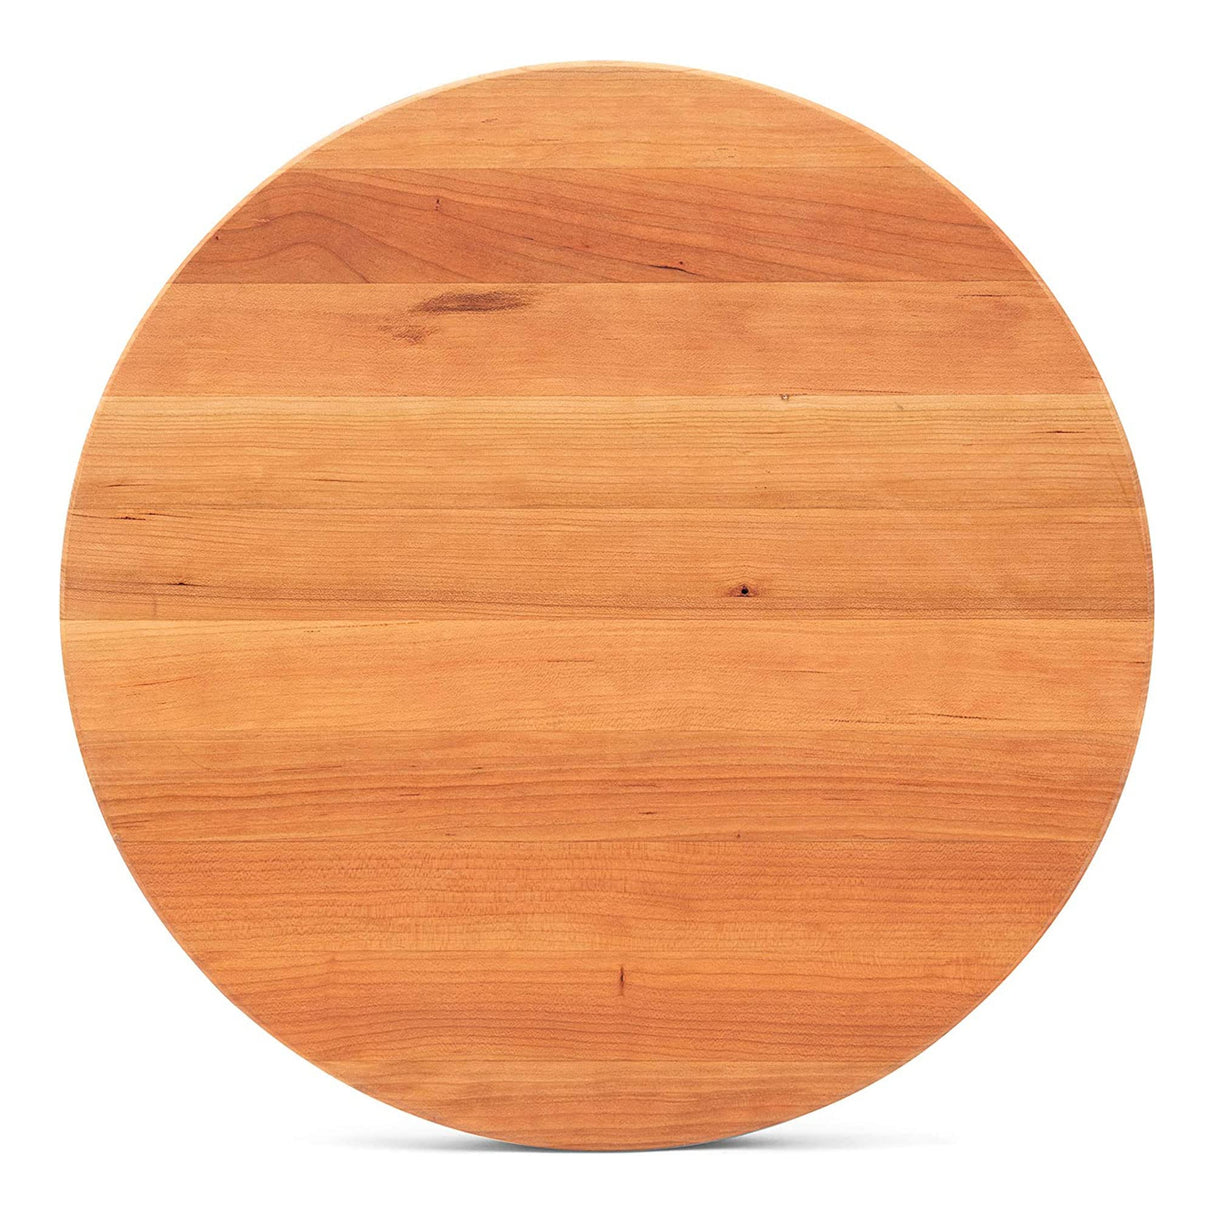 John Boos CHY-R18 Large Cherry Wood Cutting Board for Kitchen Prep 18 Inches Diameter, 1.5 Thick Reversible End Grain Round Charcuterie Block 18DIAX1.5 CHY-EDGE GR-REV-BRANDED